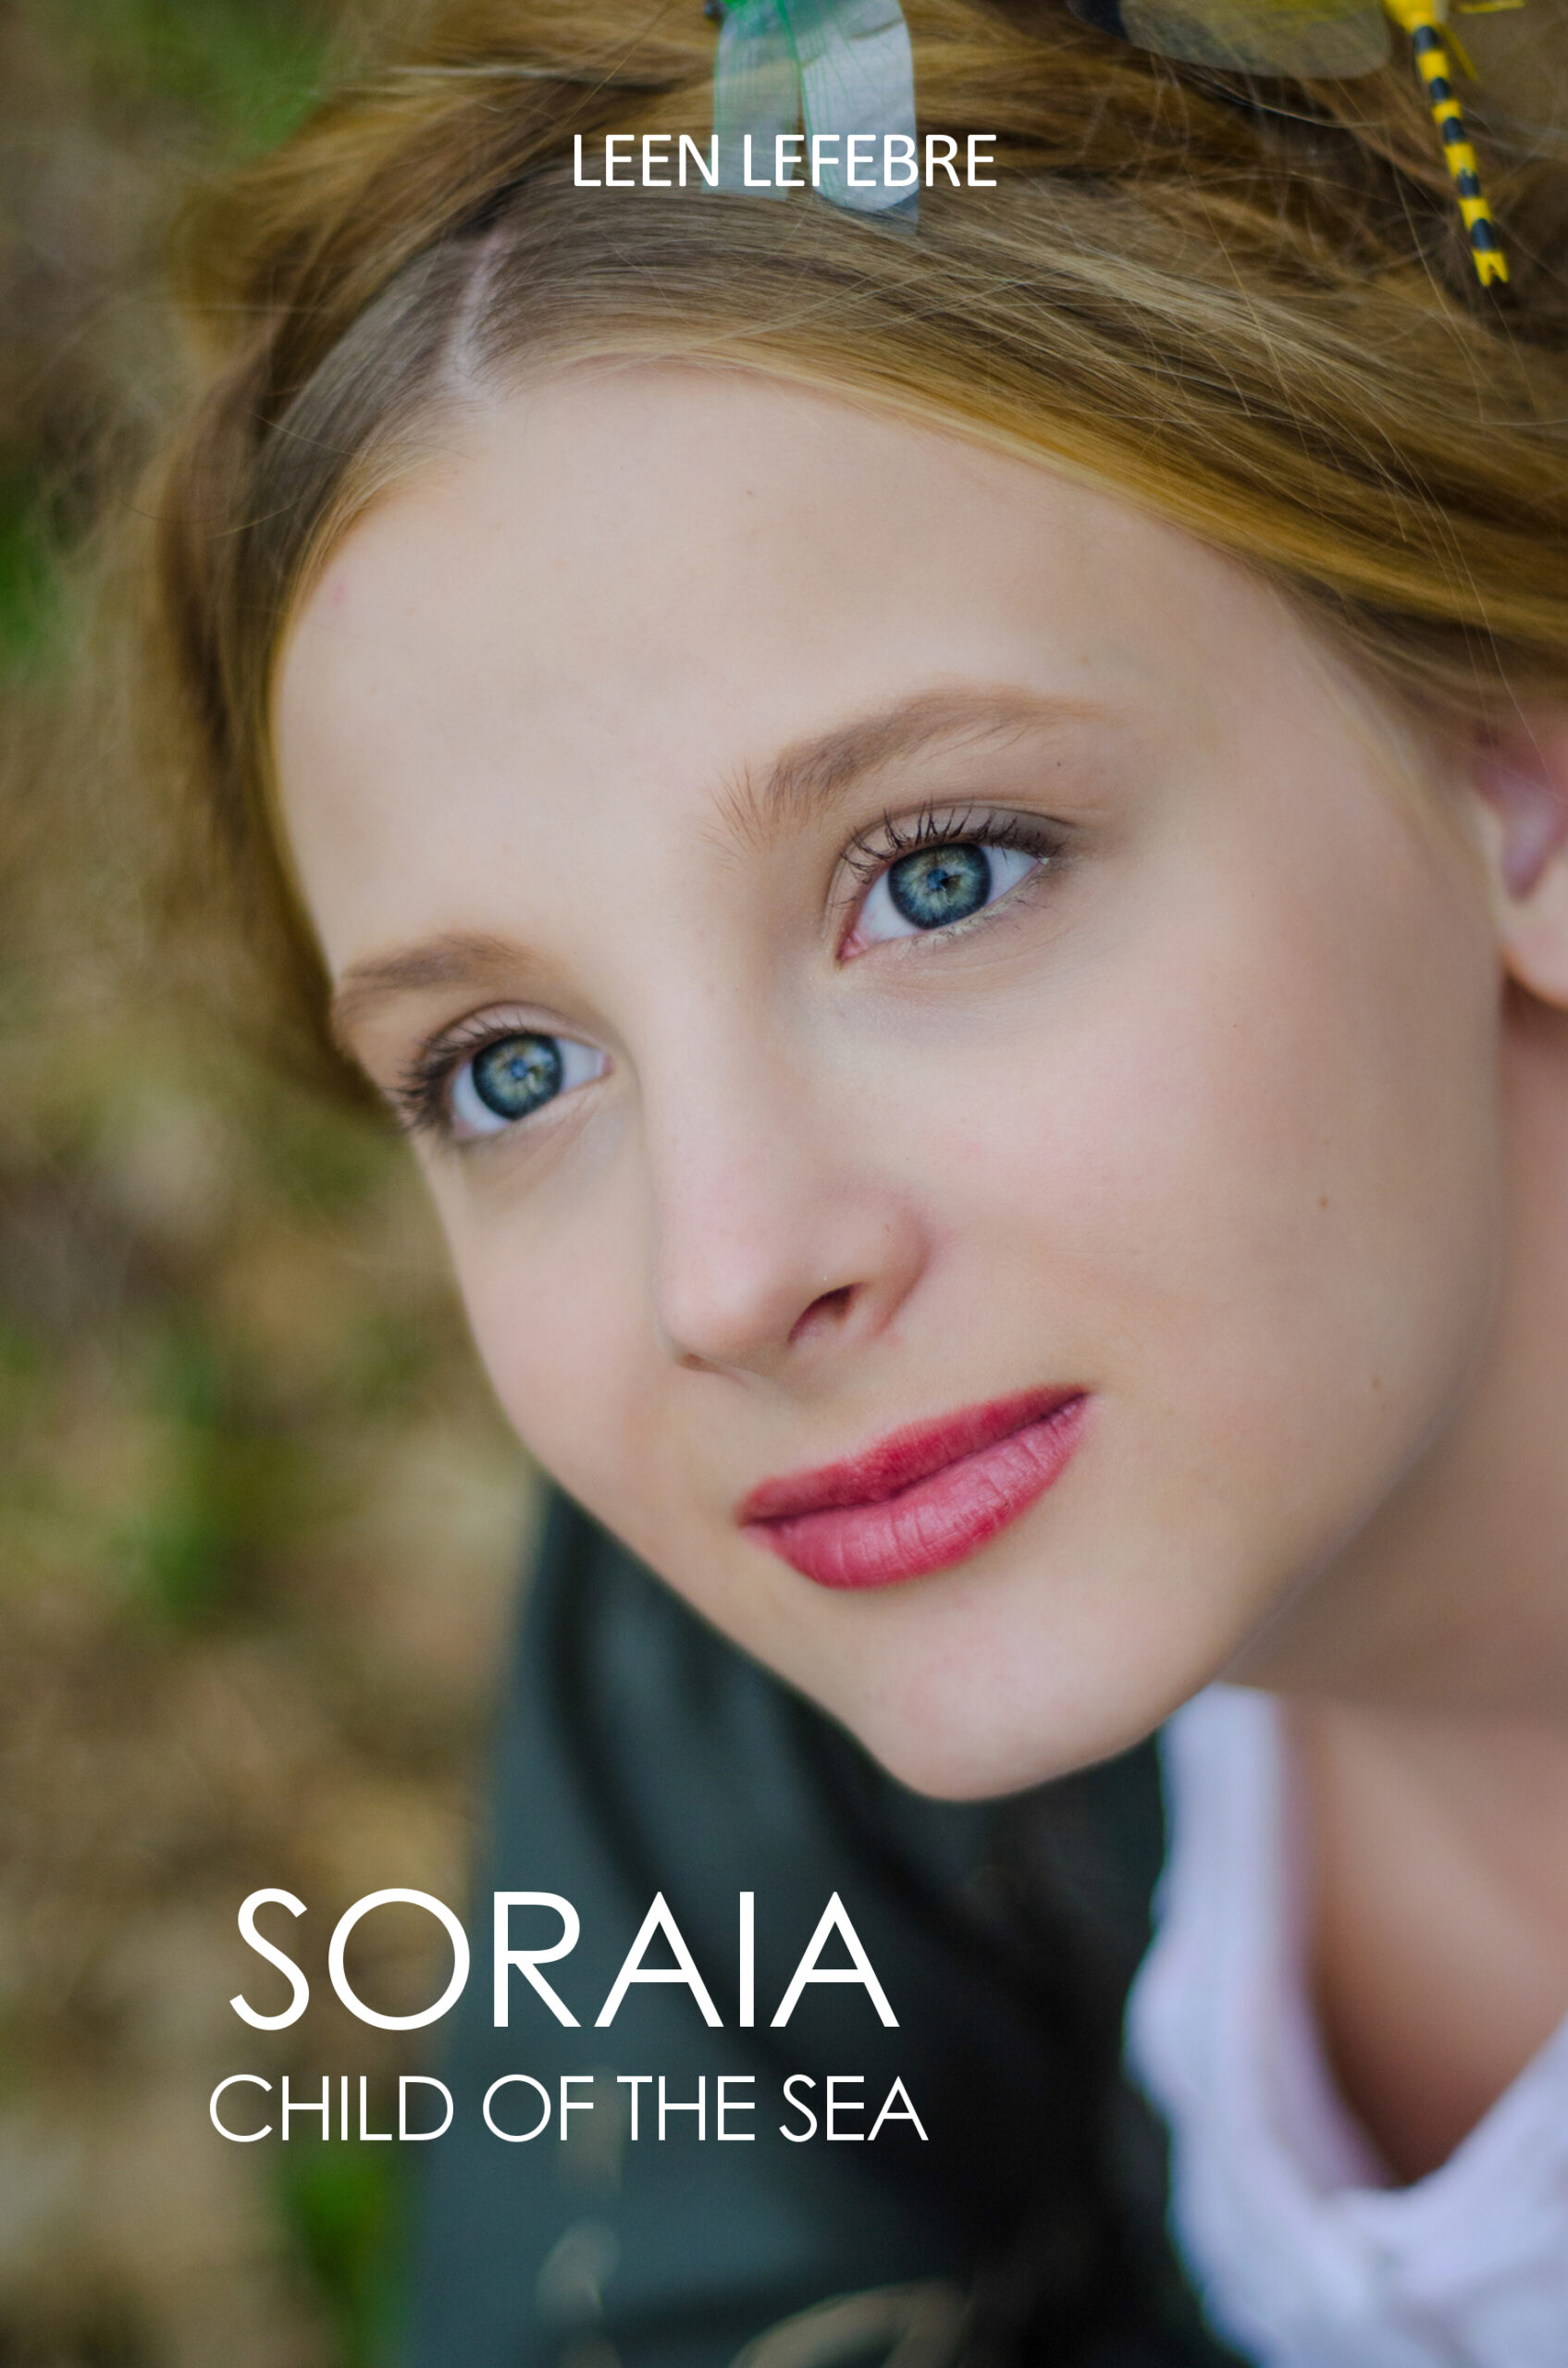 FREE: Soraia, Child of the Sea by Leen Lefebre